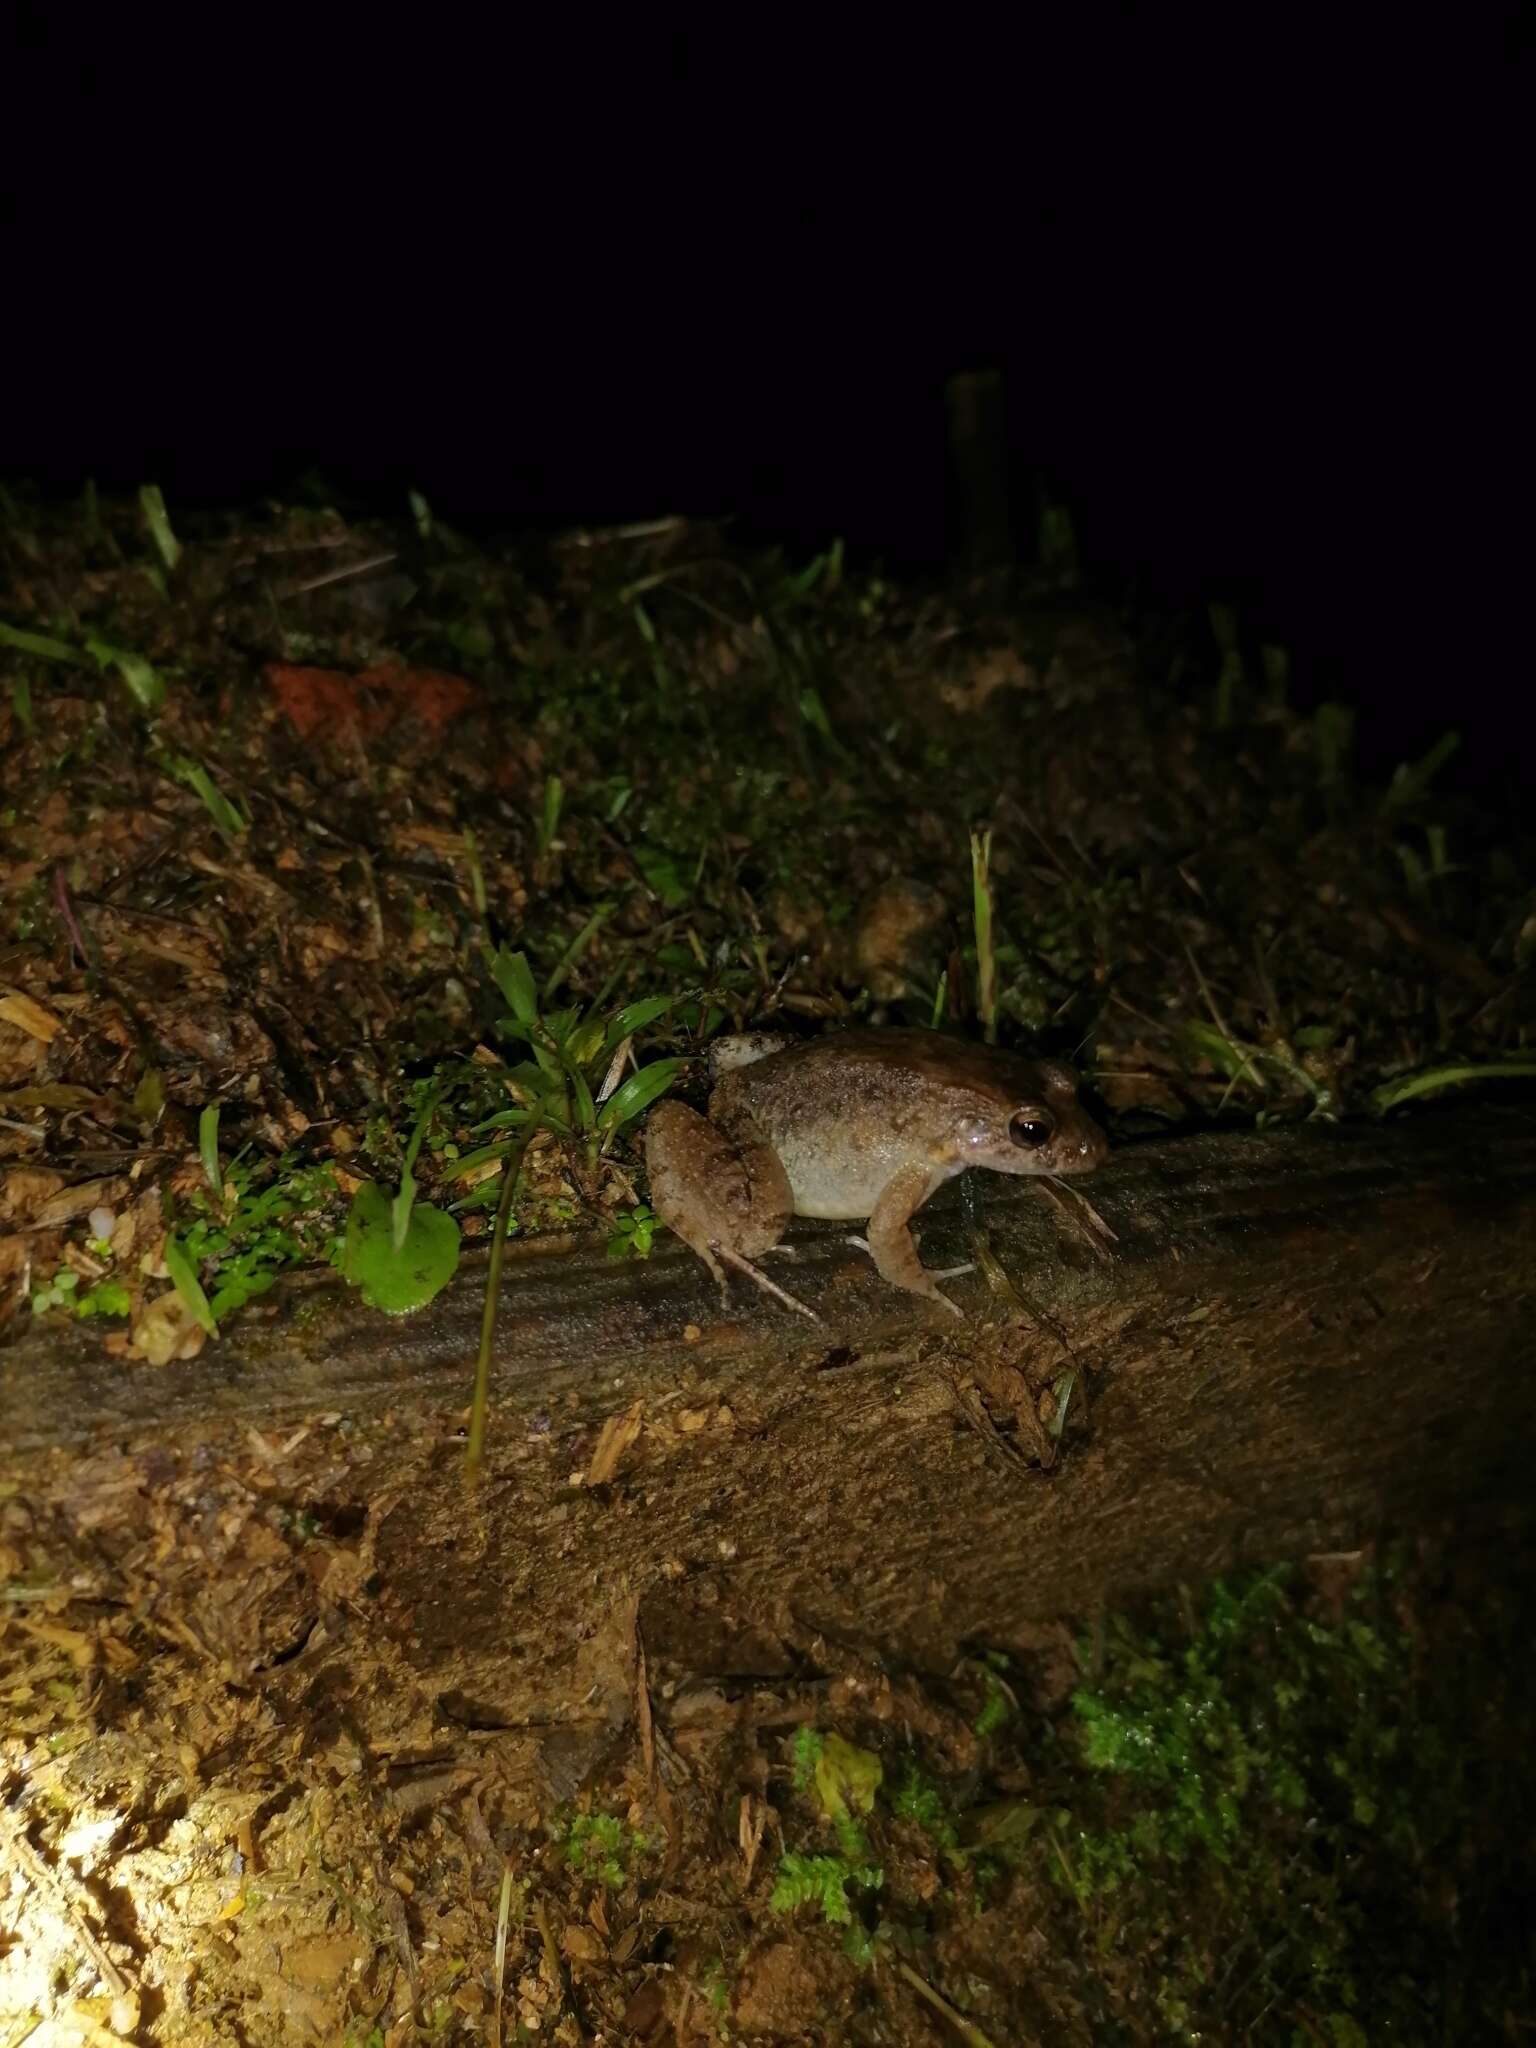 Image of Smooth-skinned ditch frog